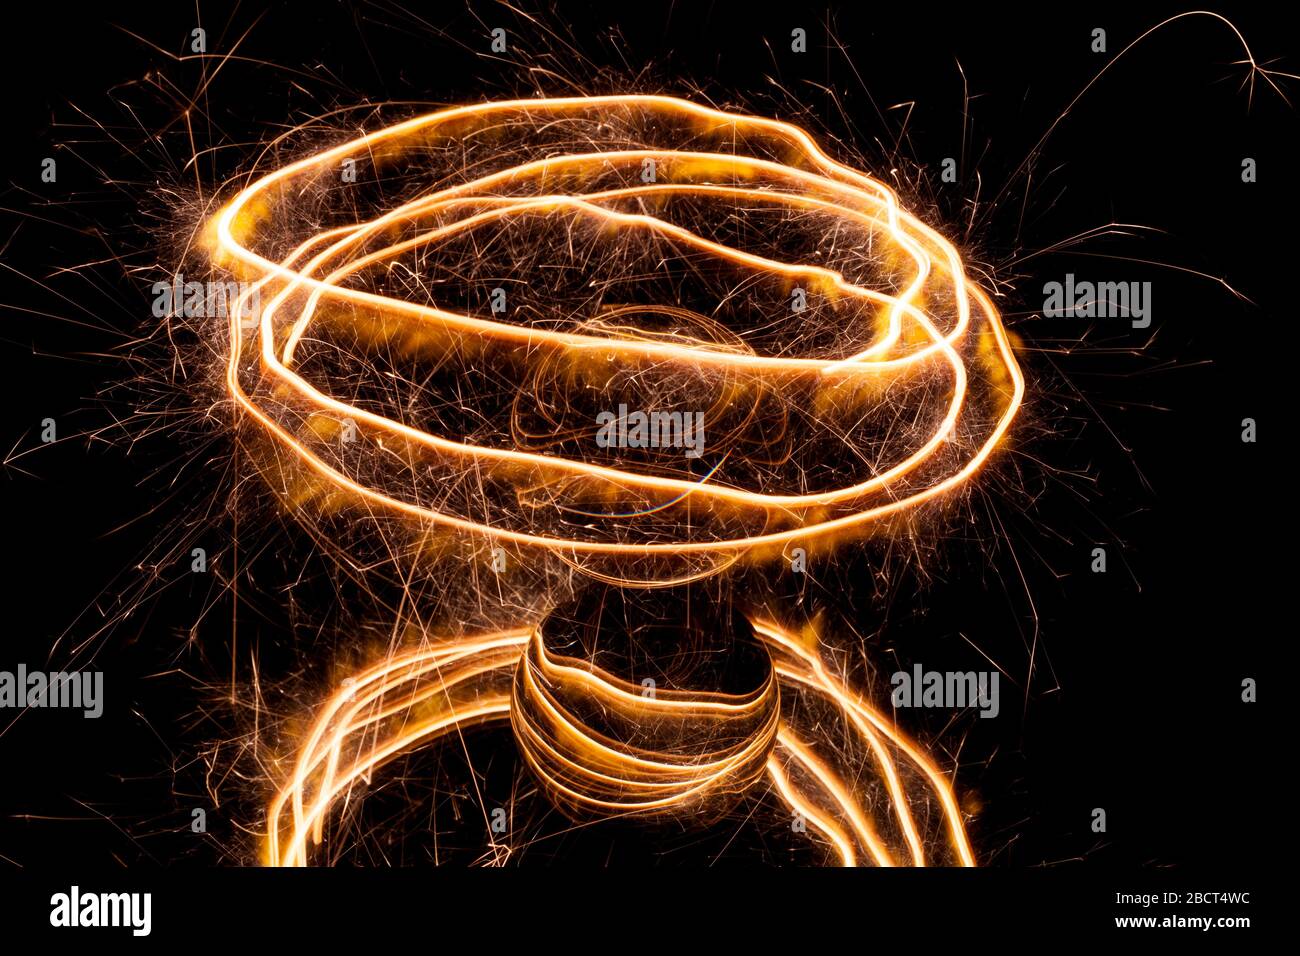 Light painting with a sparkler circling around a glass ball on a black background. Stock Photo